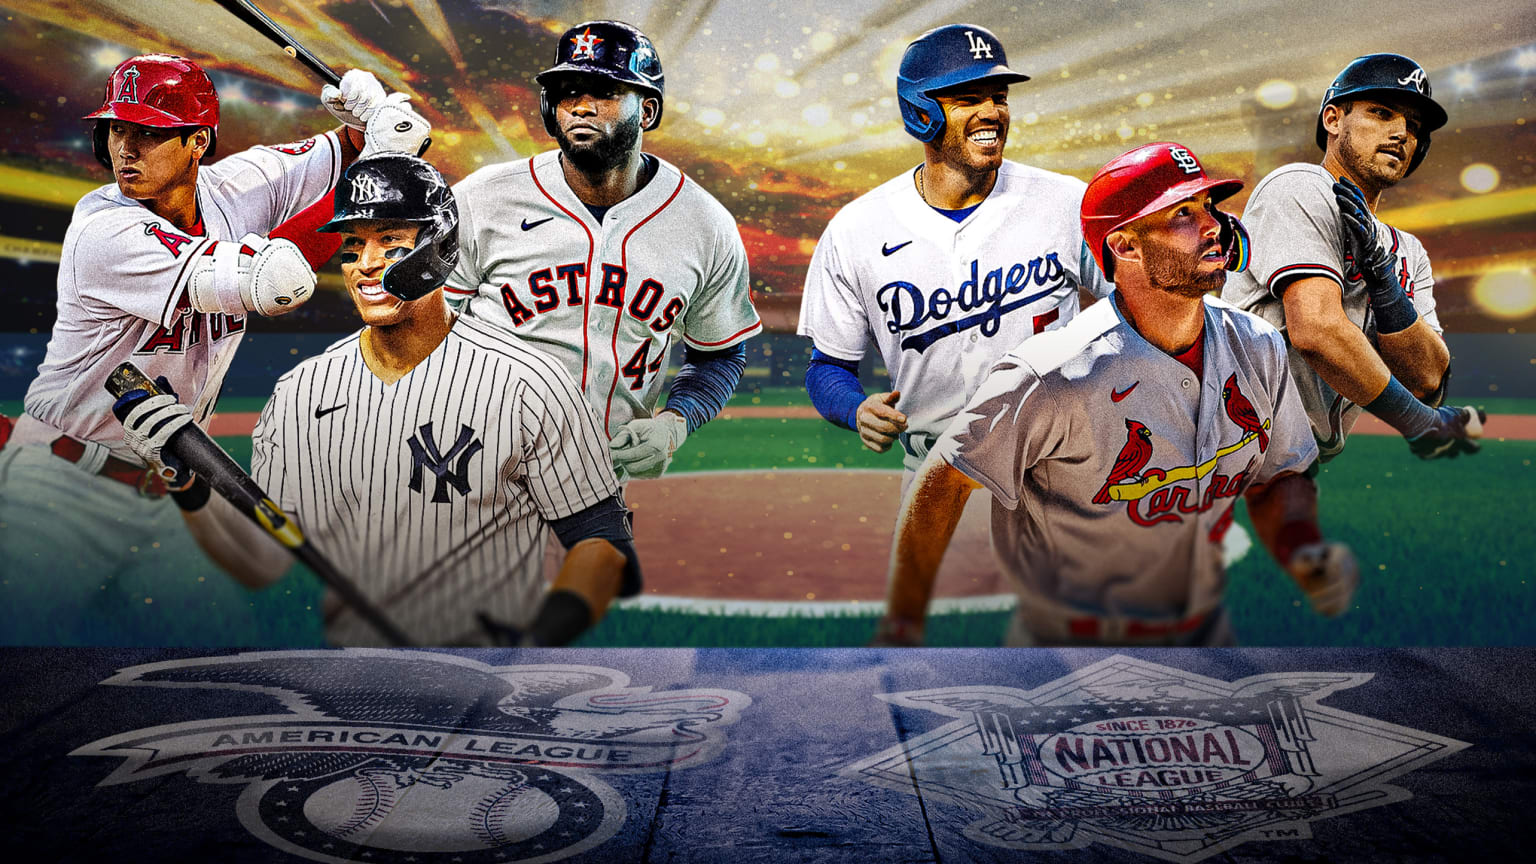 3 AL MVP candidates on the left side and 3 NL MVP candidates on the right side, with league logos beneath each group and a baseball field view as a background